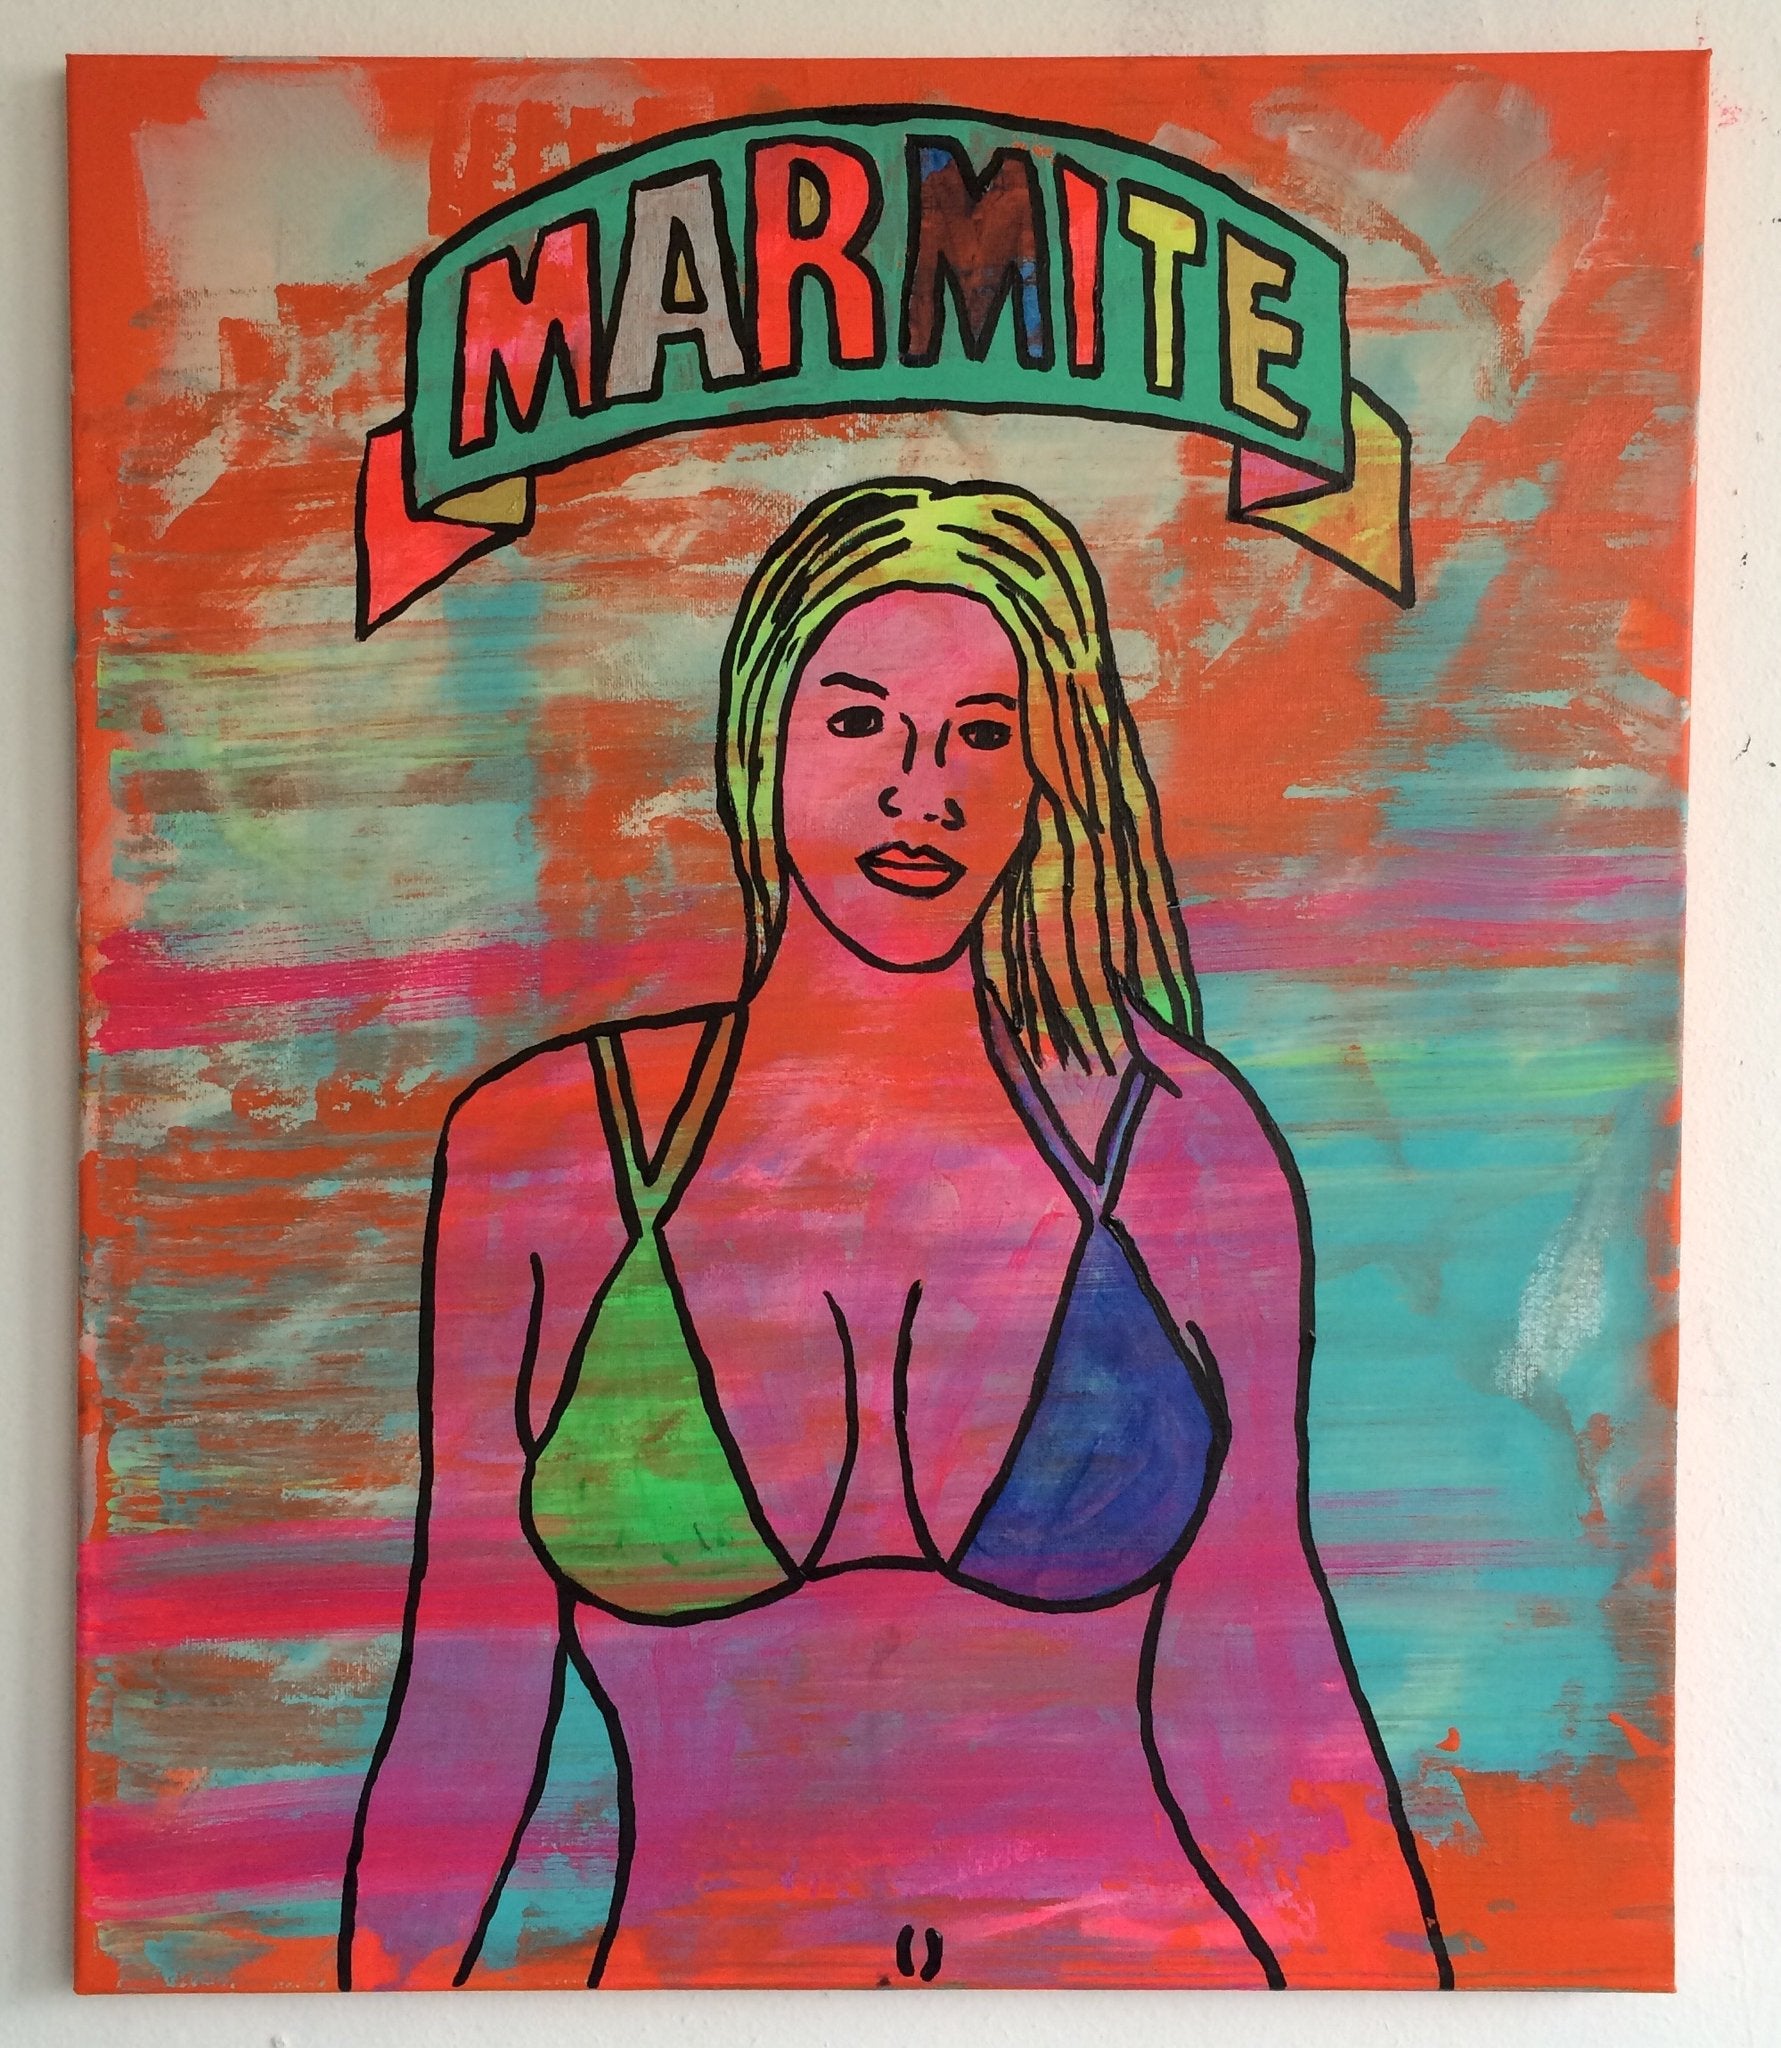 Mrs Kardashian by Barrie J Davies 2015, Mixed media painting on canvas, 50cm x 60cm, unframed. Barrie J Davies is an Artist - Pop Art and Street art inspired Artist based in Brighton England UK - Pop Art Paintings, Street Art Prints & Editions available.